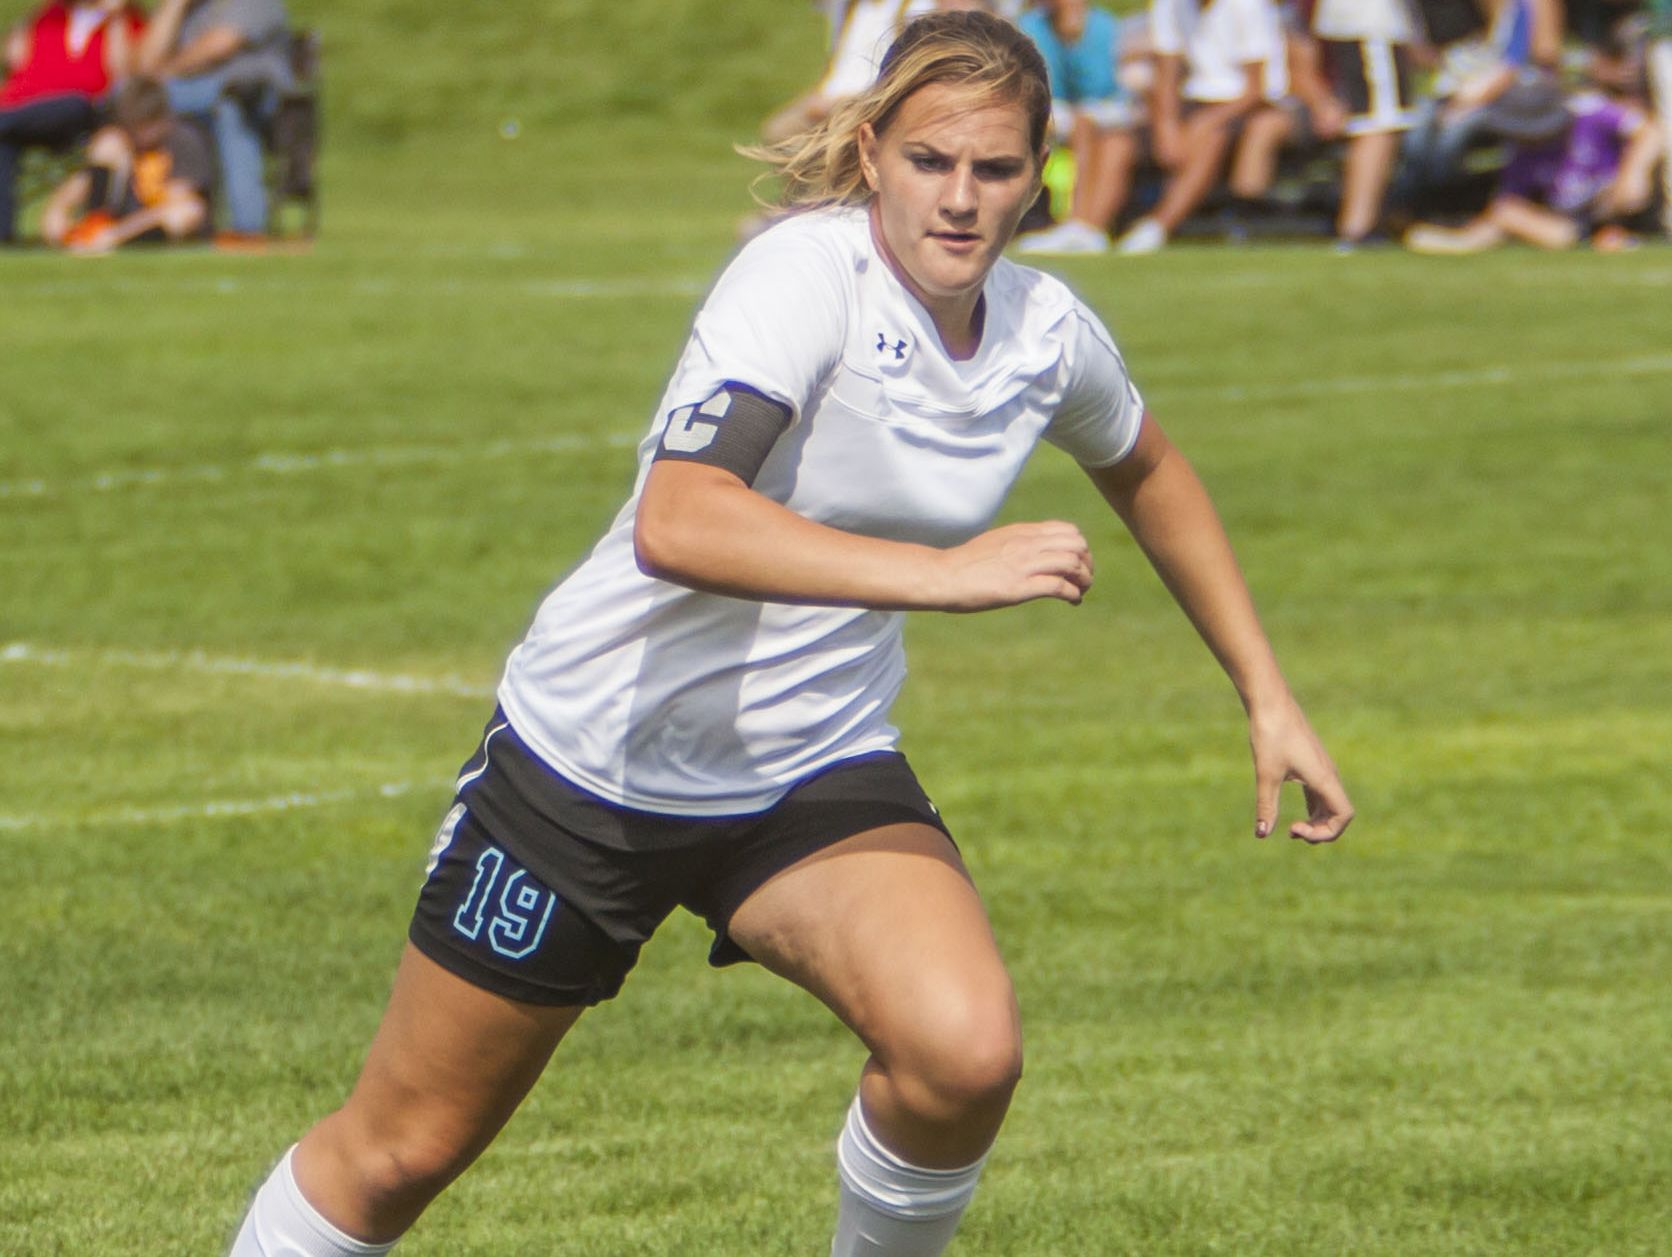 Canyon View won its fourth consecutive game Tuesday as the Falcons took down Juab 5-0 at home. Mia Smith scored two goals and keeper Jessica Hinck earned the shutout for the Falcons.